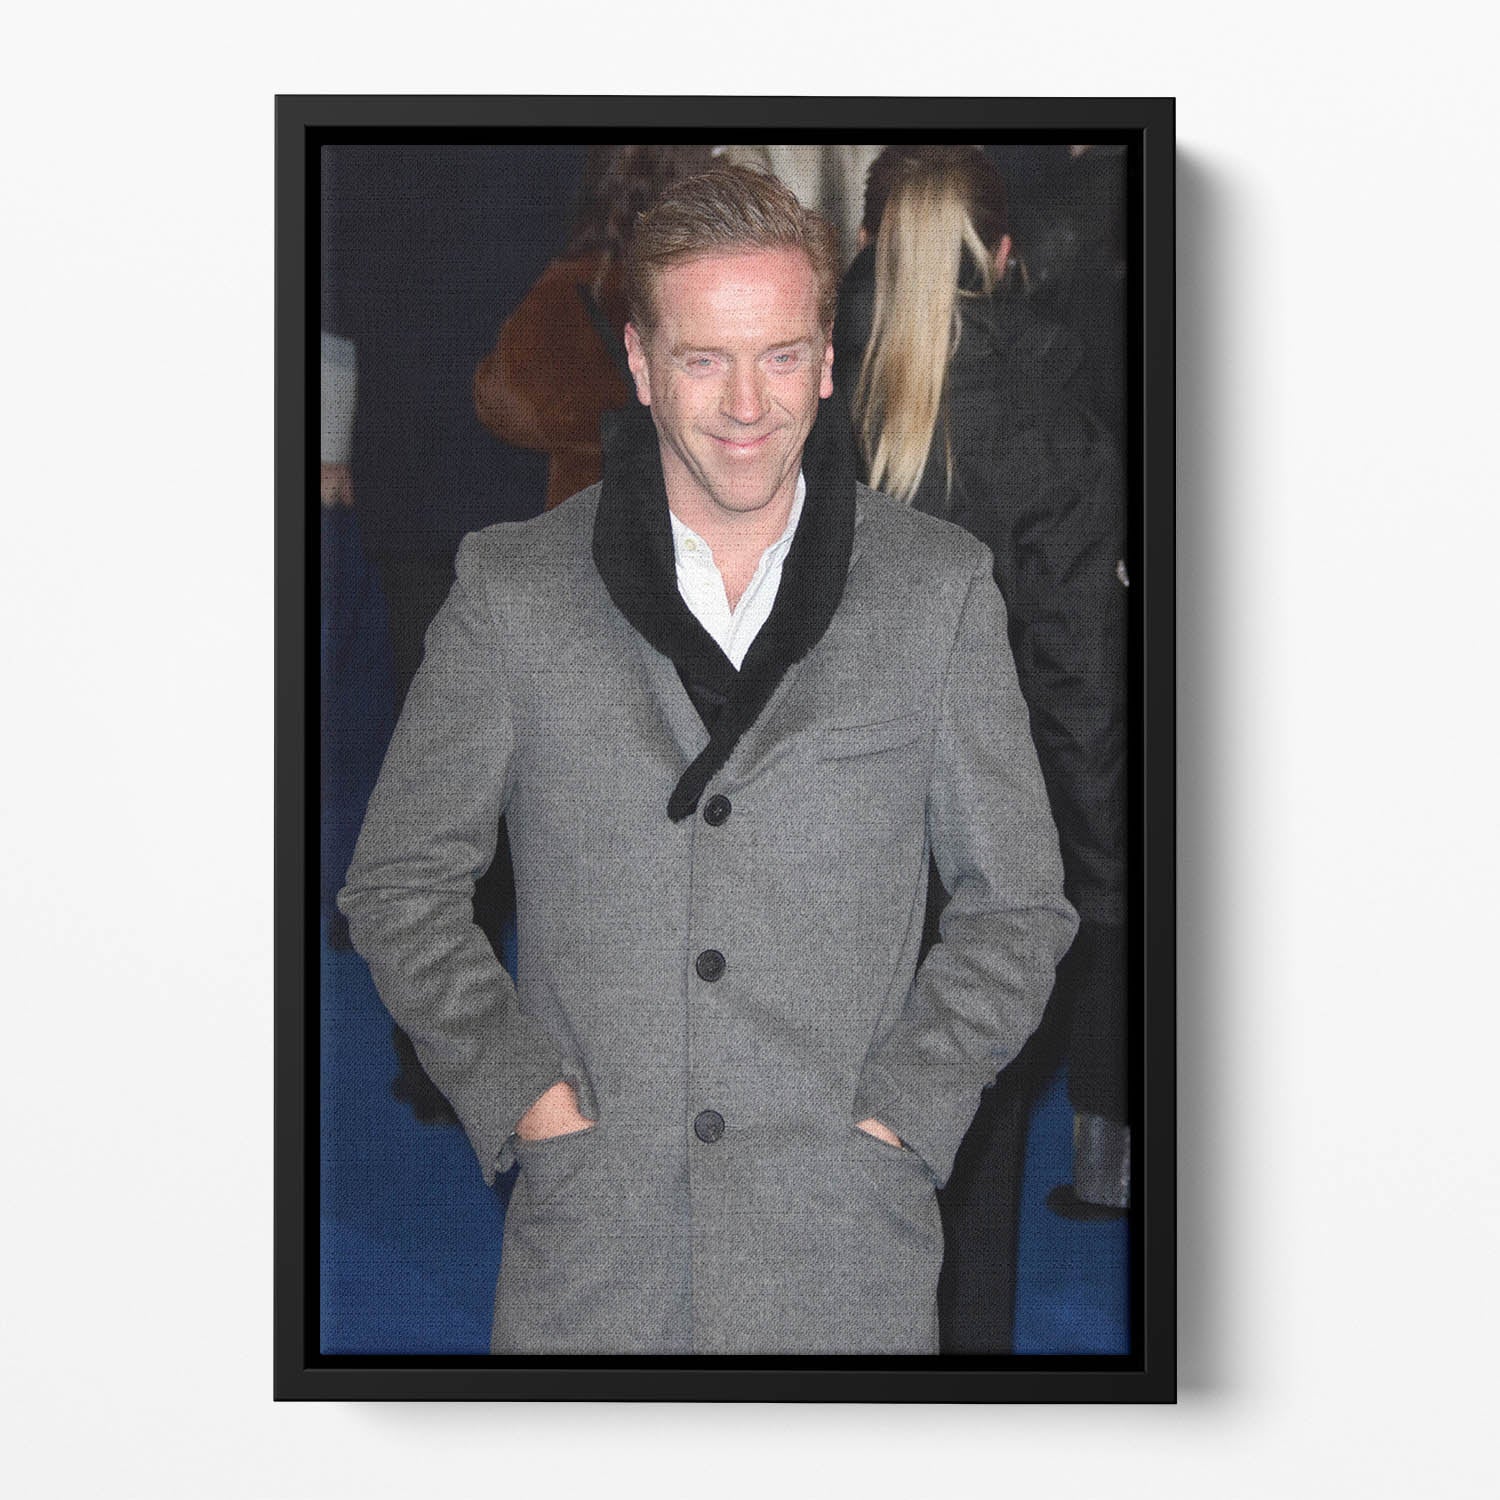 Damian Lewis on the red carpet Floating Framed Canvas